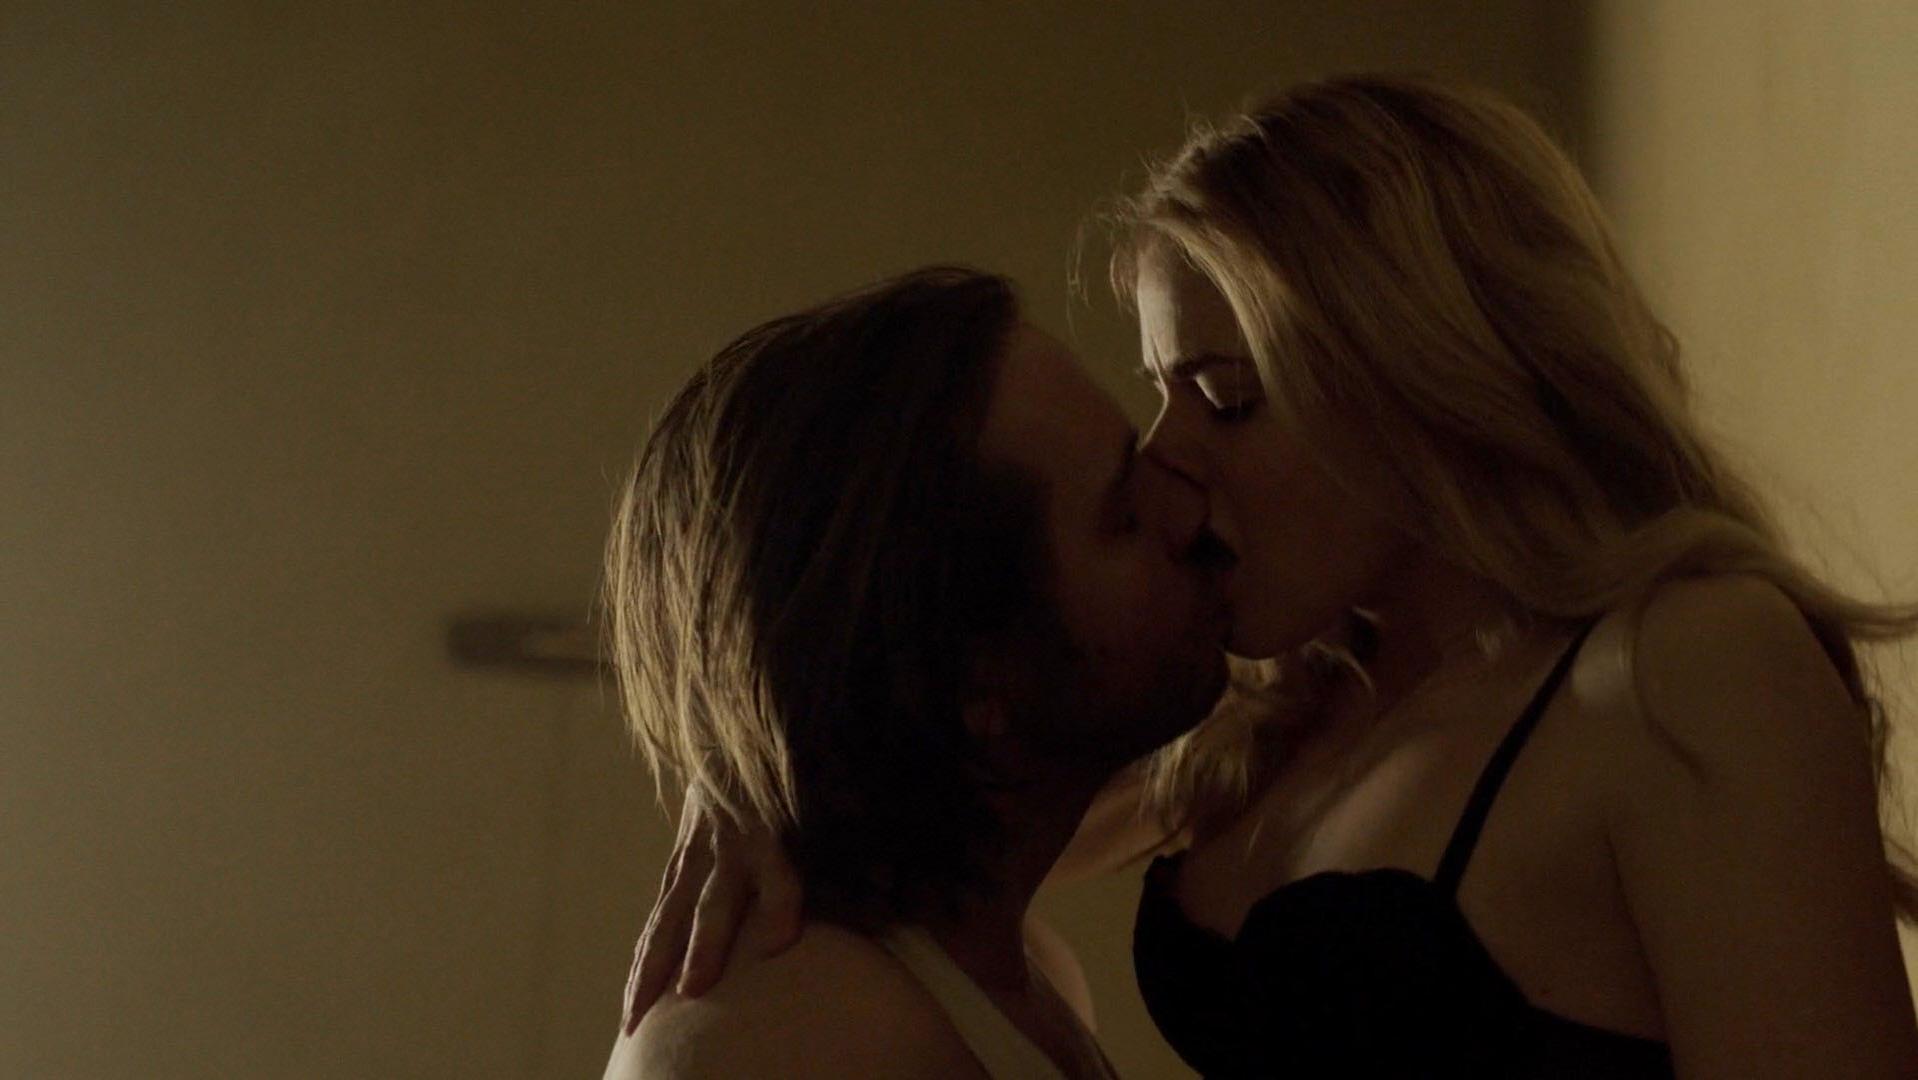 There is not so much nudity but Amanda Schull looks pretty hot in that unde...